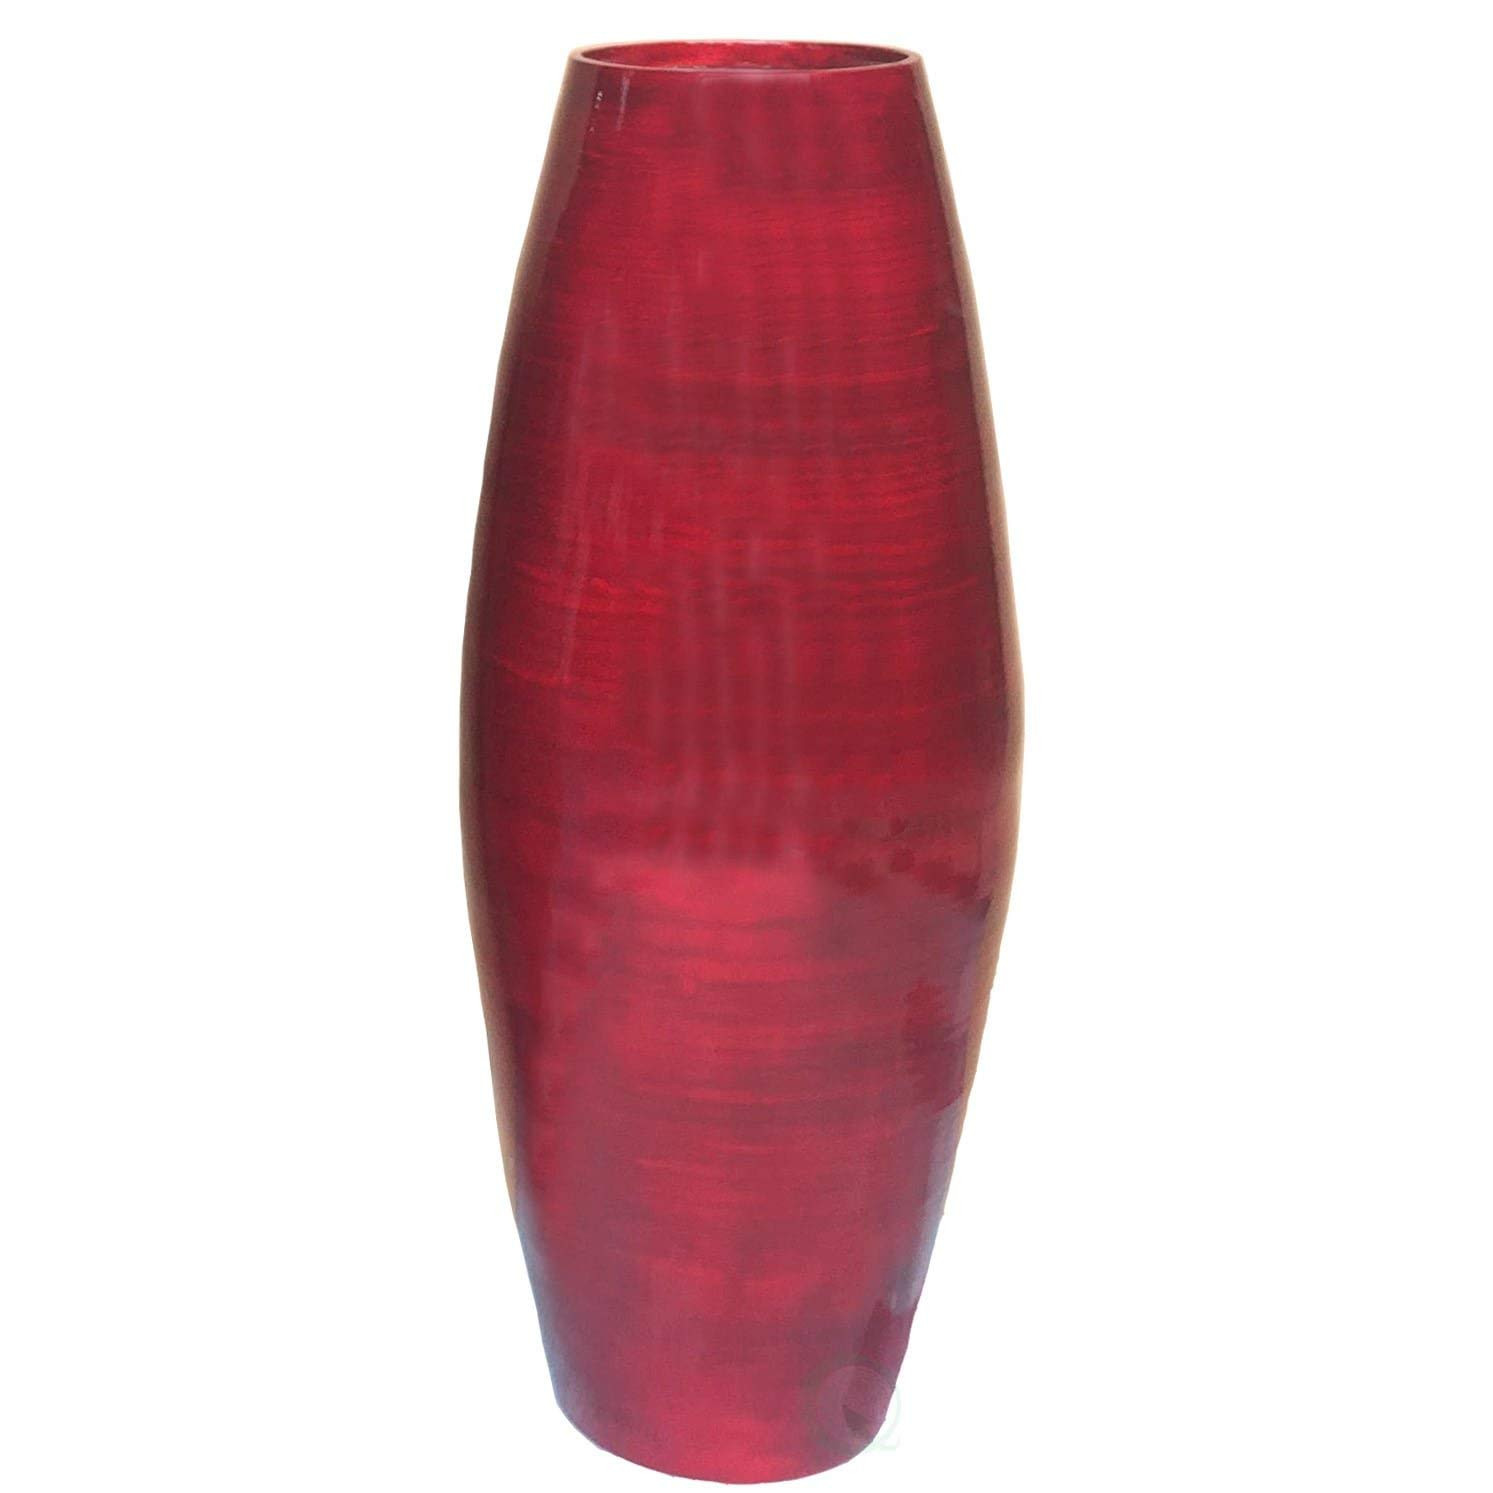 20 Amazing 36 Inch Glass Cylinder Vases 2024 free download 36 inch glass cylinder vases of amazon com uniquewise 27 5 tall bamboo floor vase red home throughout amazon com uniquewise 27 5 tall bamboo floor vase red home kitchen